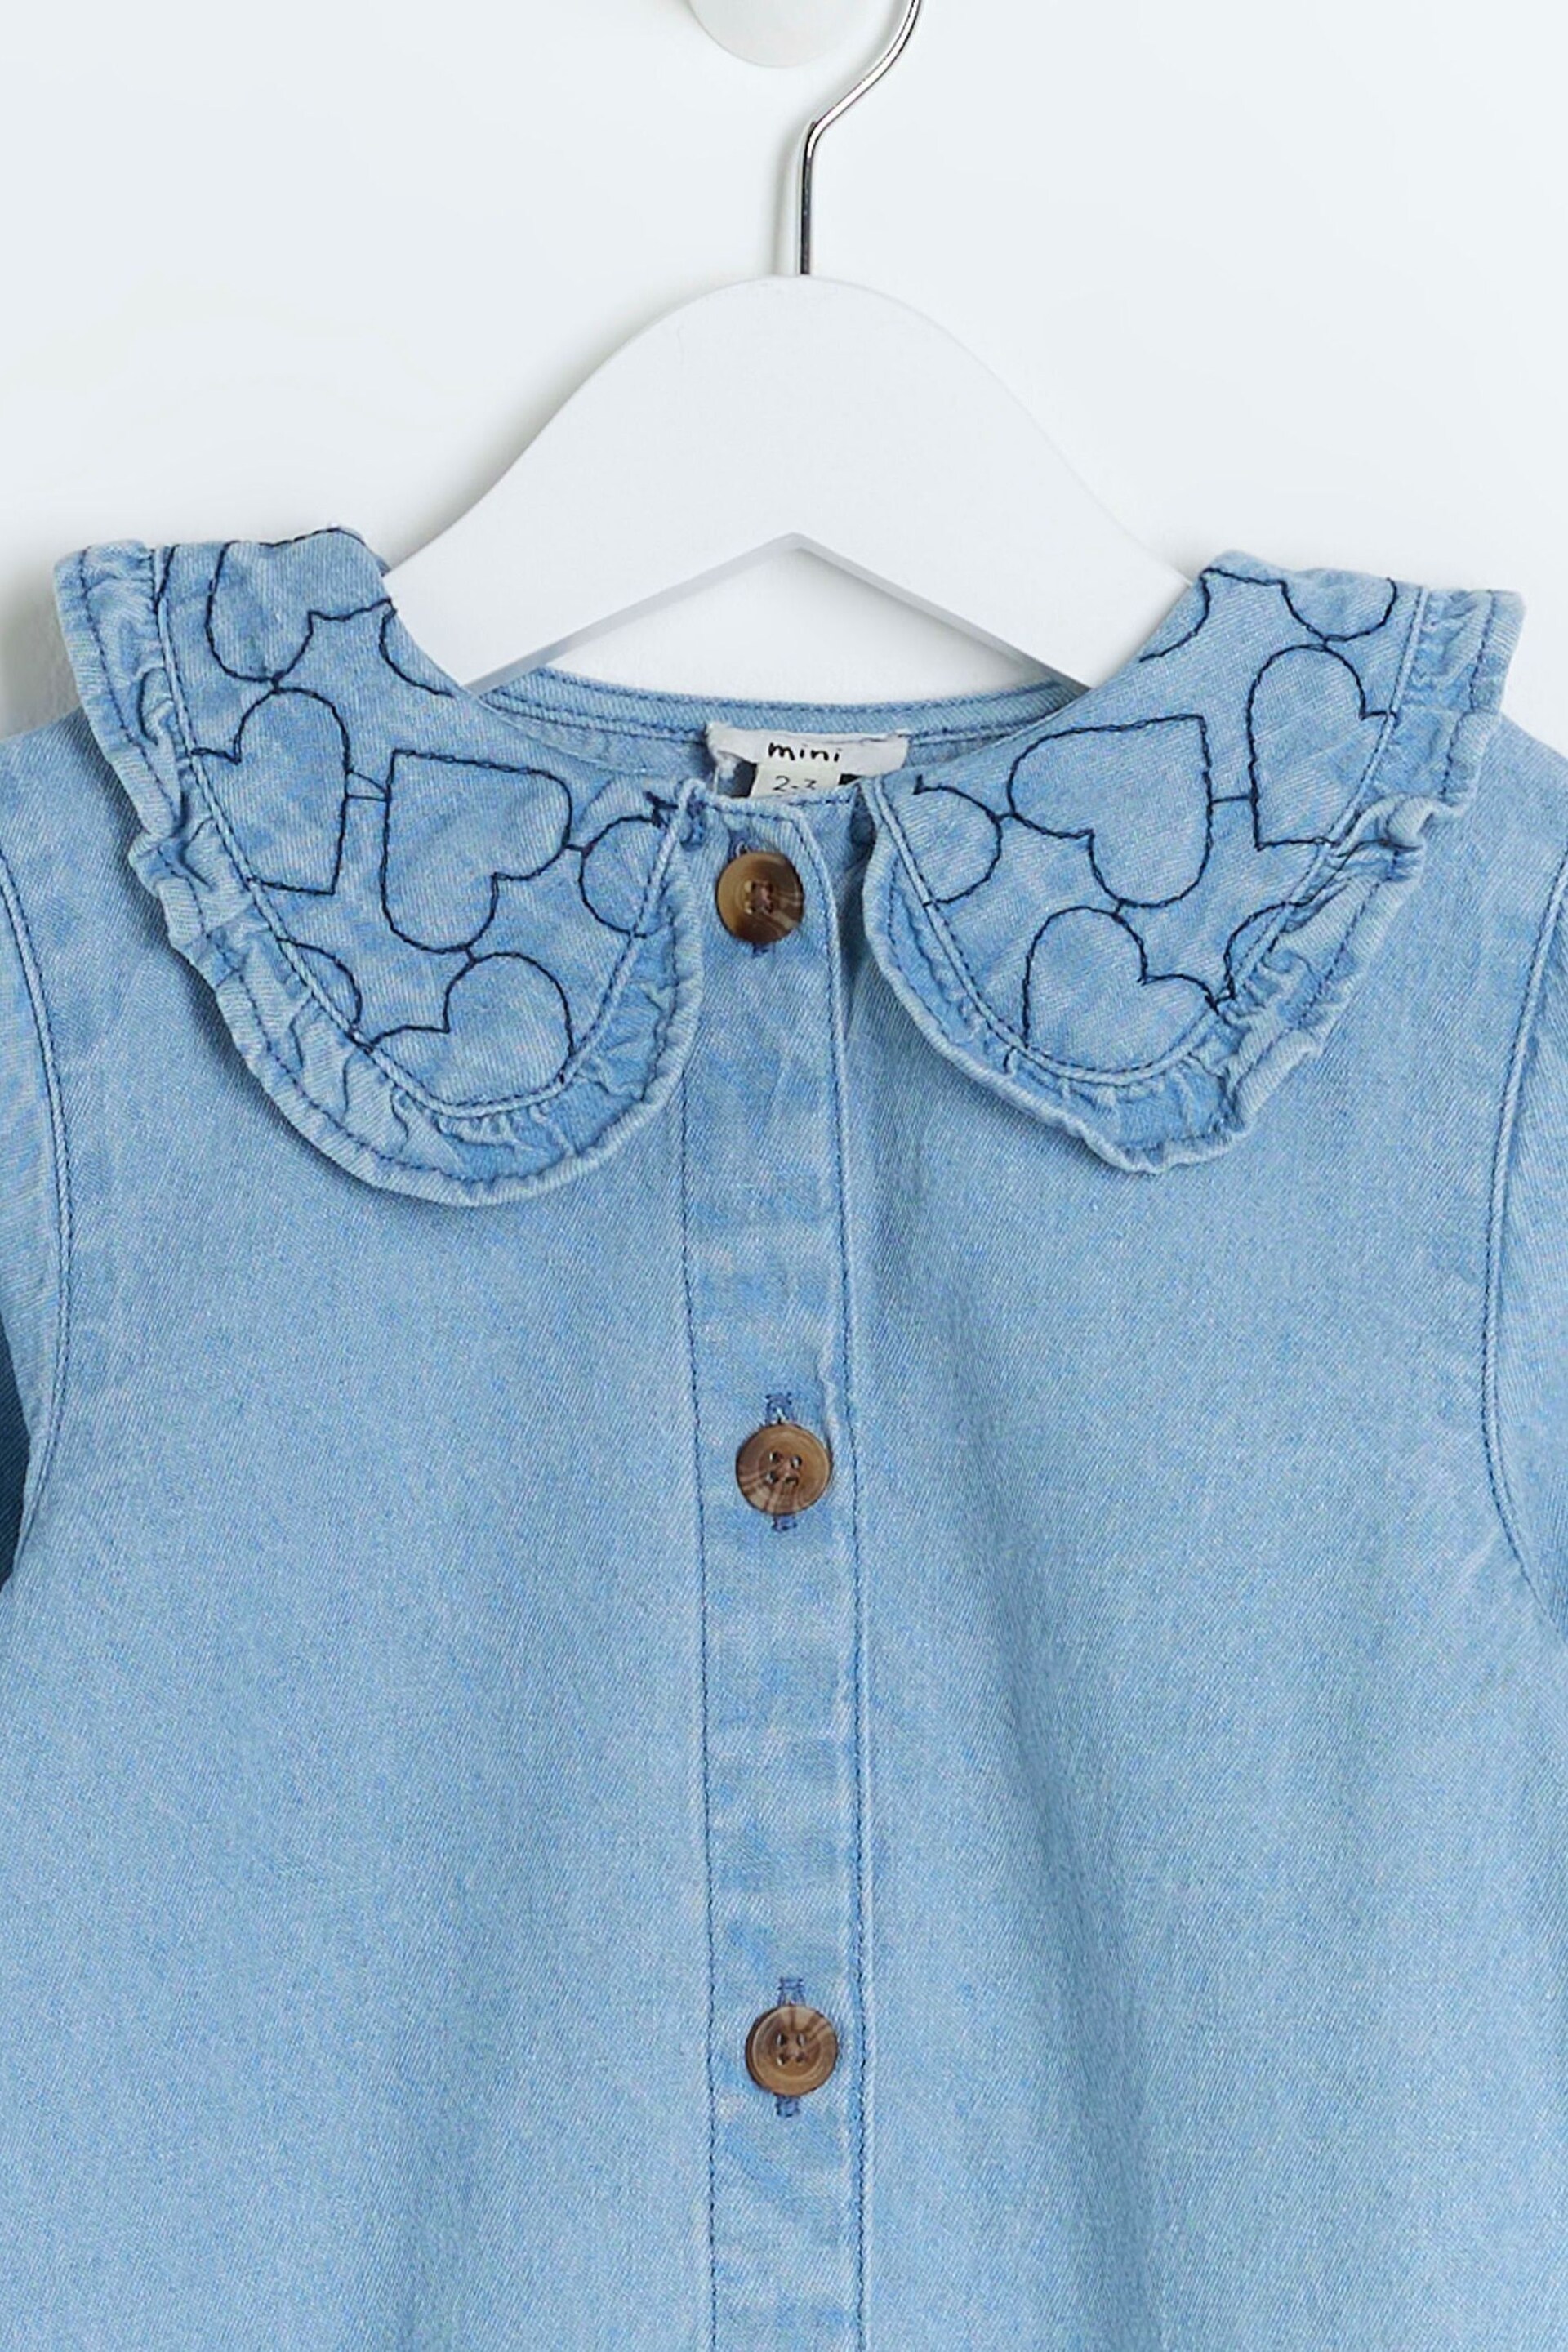 River Island Blue Girls Heart Quilted Blouse Set - Image 5 of 5